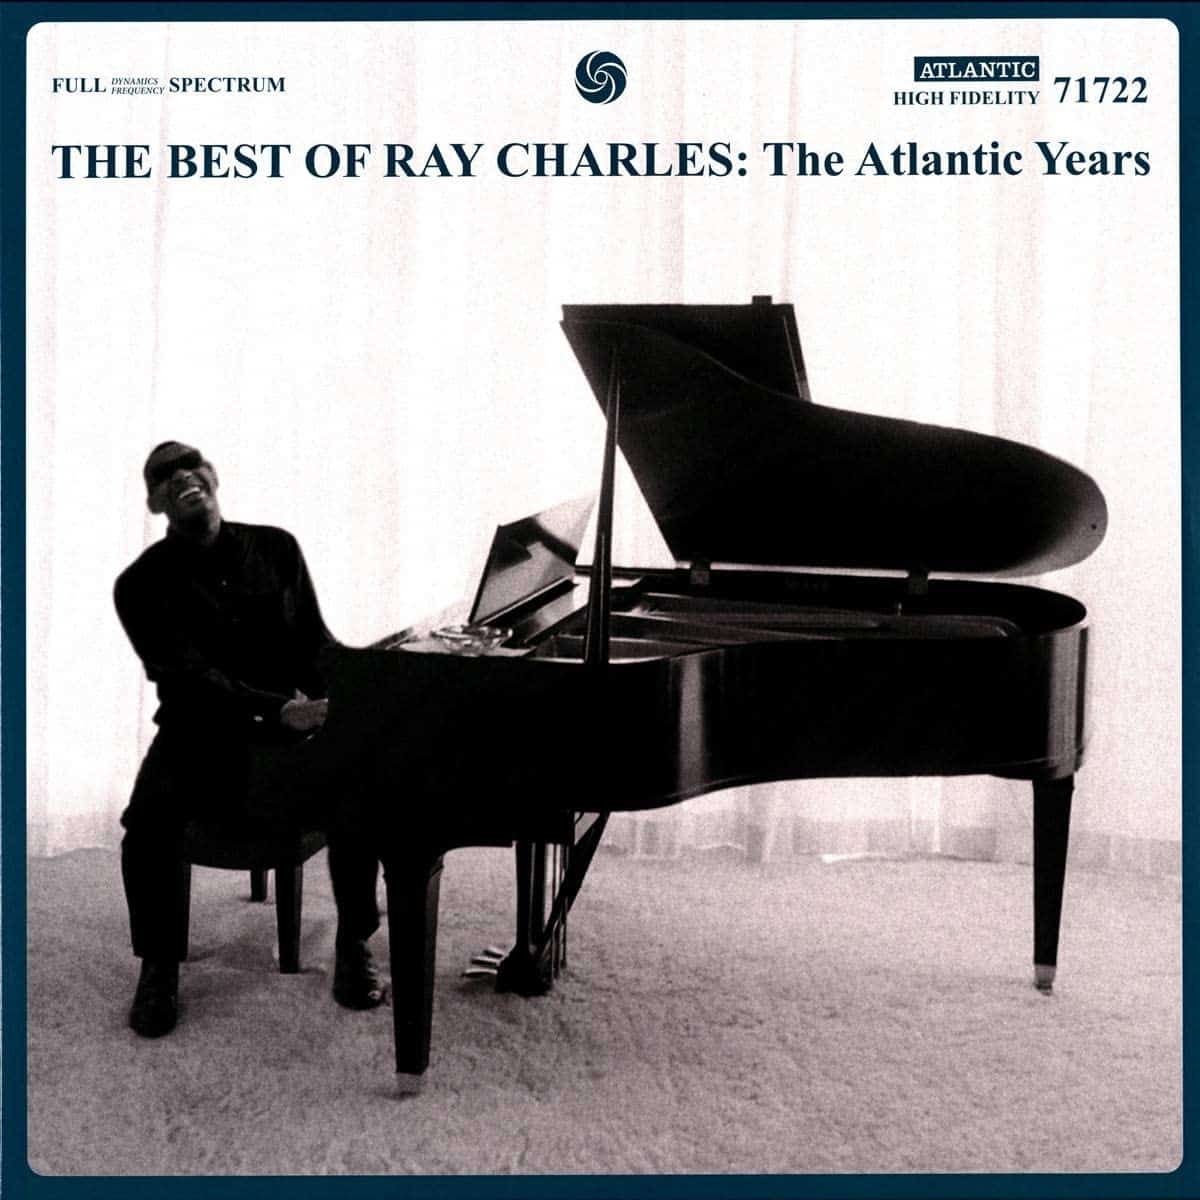 RAY CHARLES - THE BEST OF RAY CHARLES: THE ATLANTIC YEARS